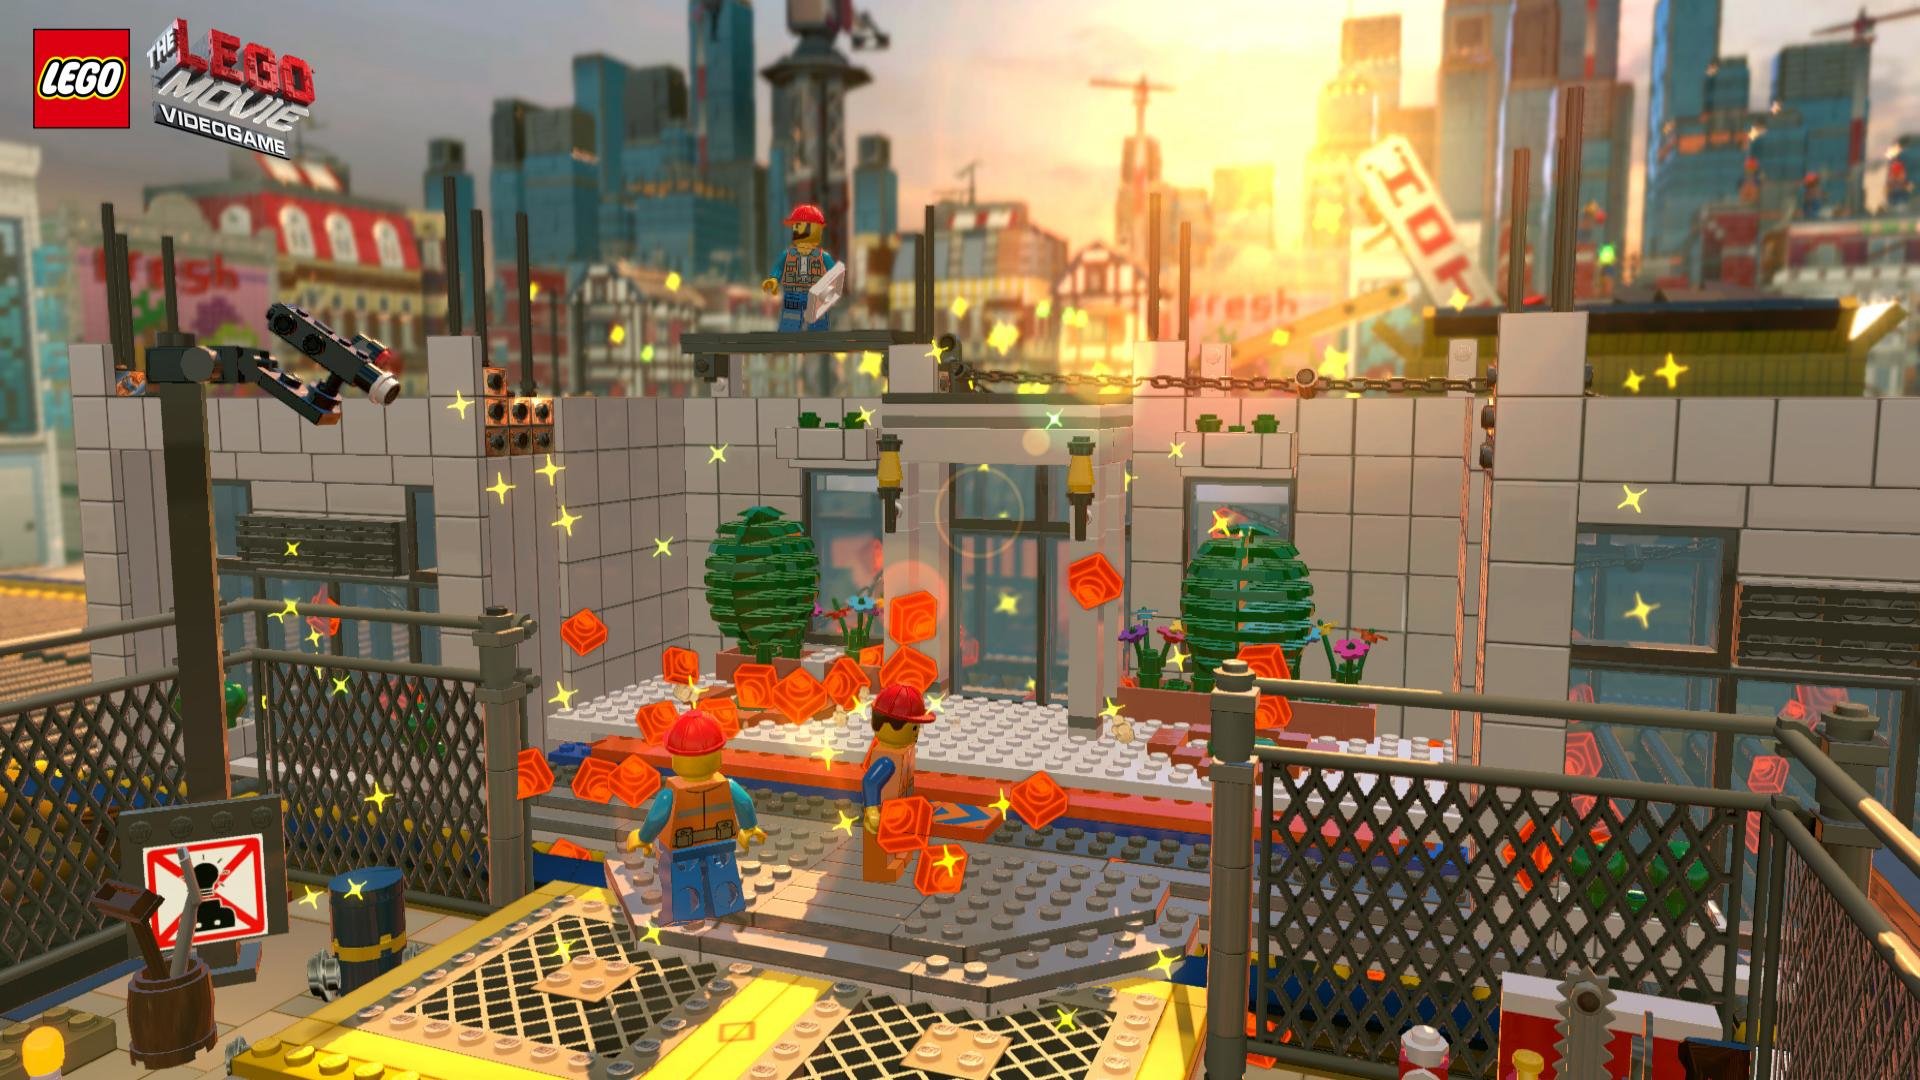 Free Download The Lego Movie Videogame Background Id - Lego Movie Videogame - HD Wallpaper 